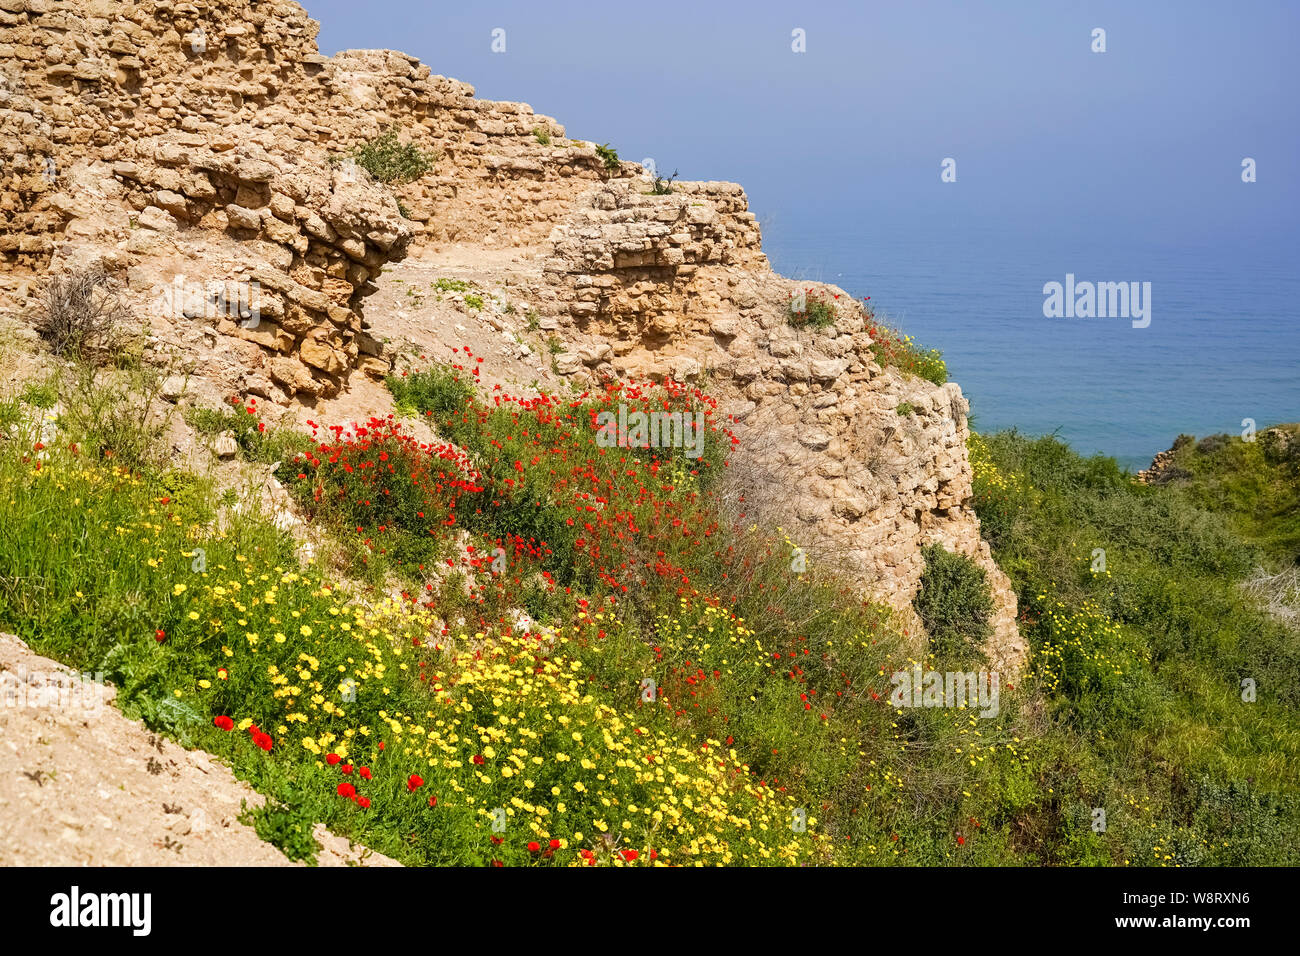 The remains of the old fort of Apolonia, AKA Arsuf, Apollonia is an archaeological park containing the ruins of the Crusade city, fort and port on the Stock Photo